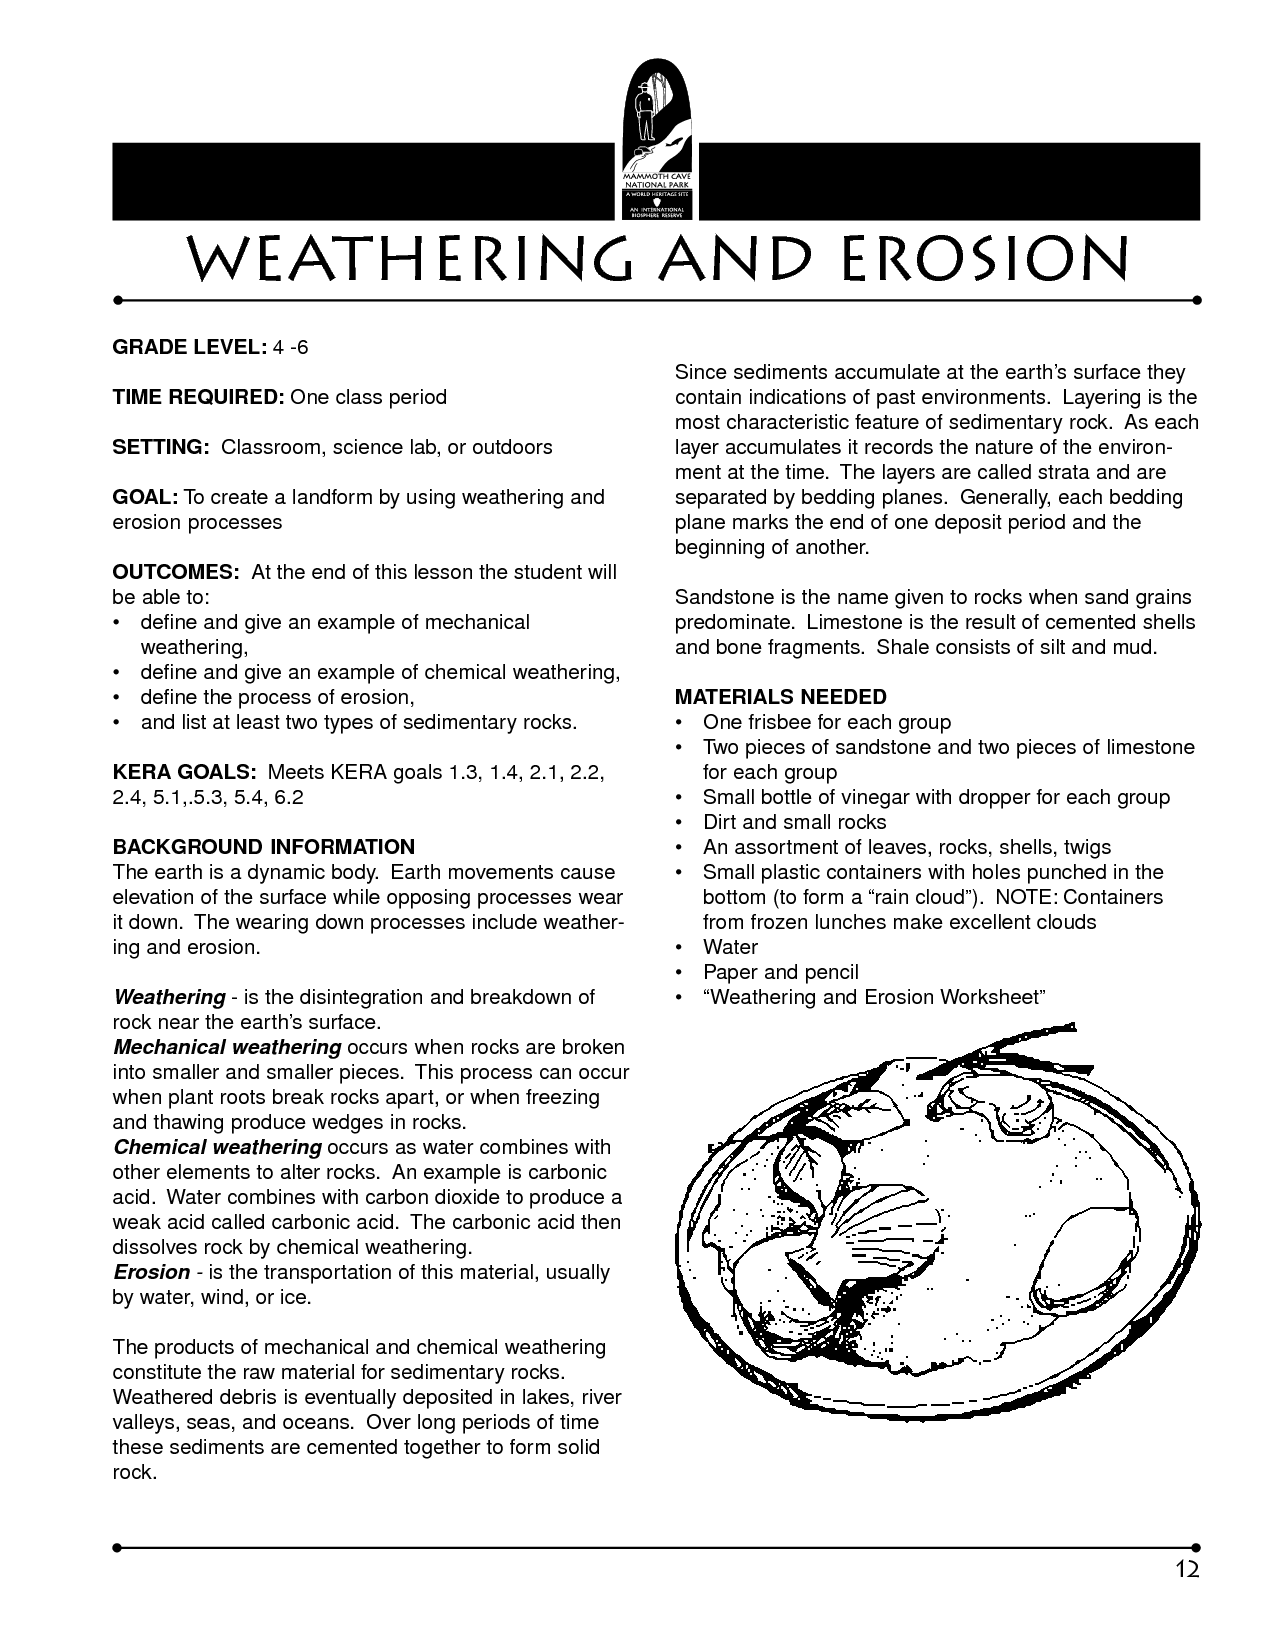 12 Best Images of Printable Erosion Worksheets Weathering and Erosion